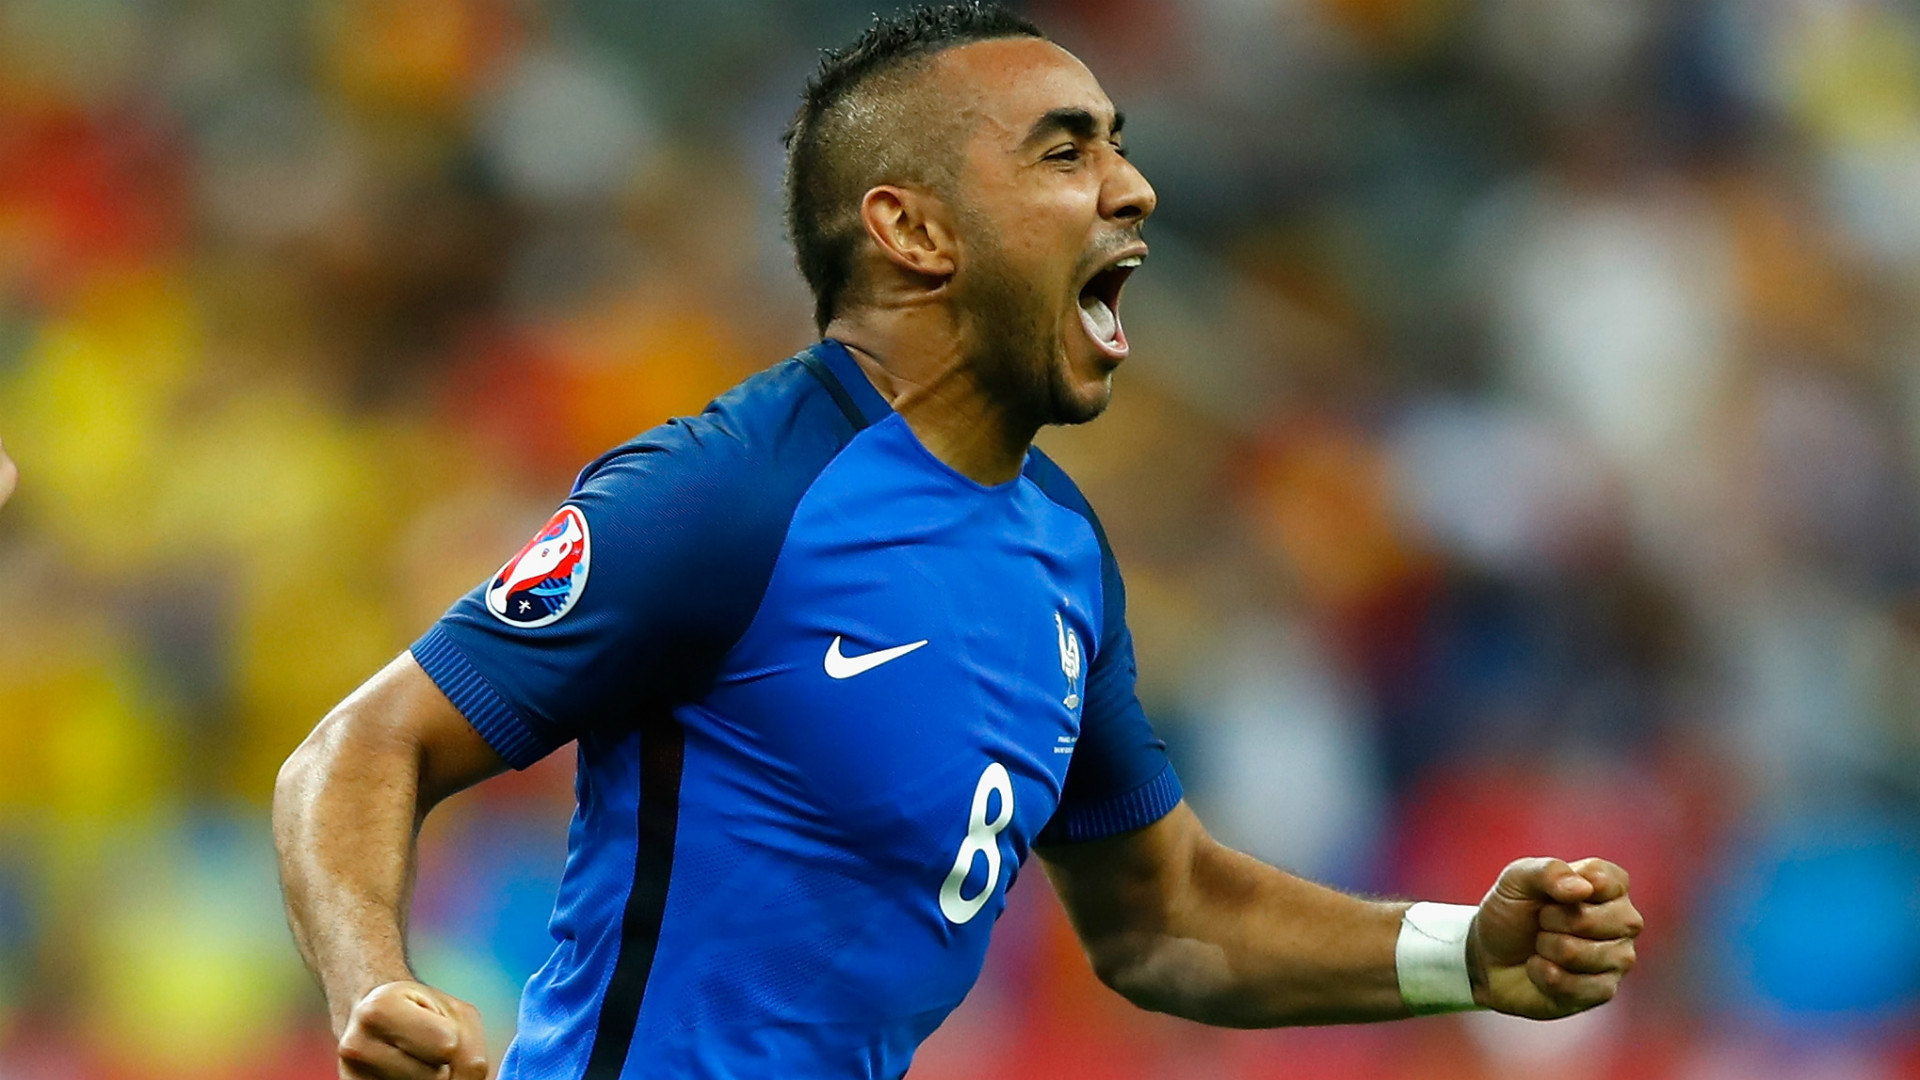 Team of the Euro 2016 group stage: Payet, Perisic join blistering Bale